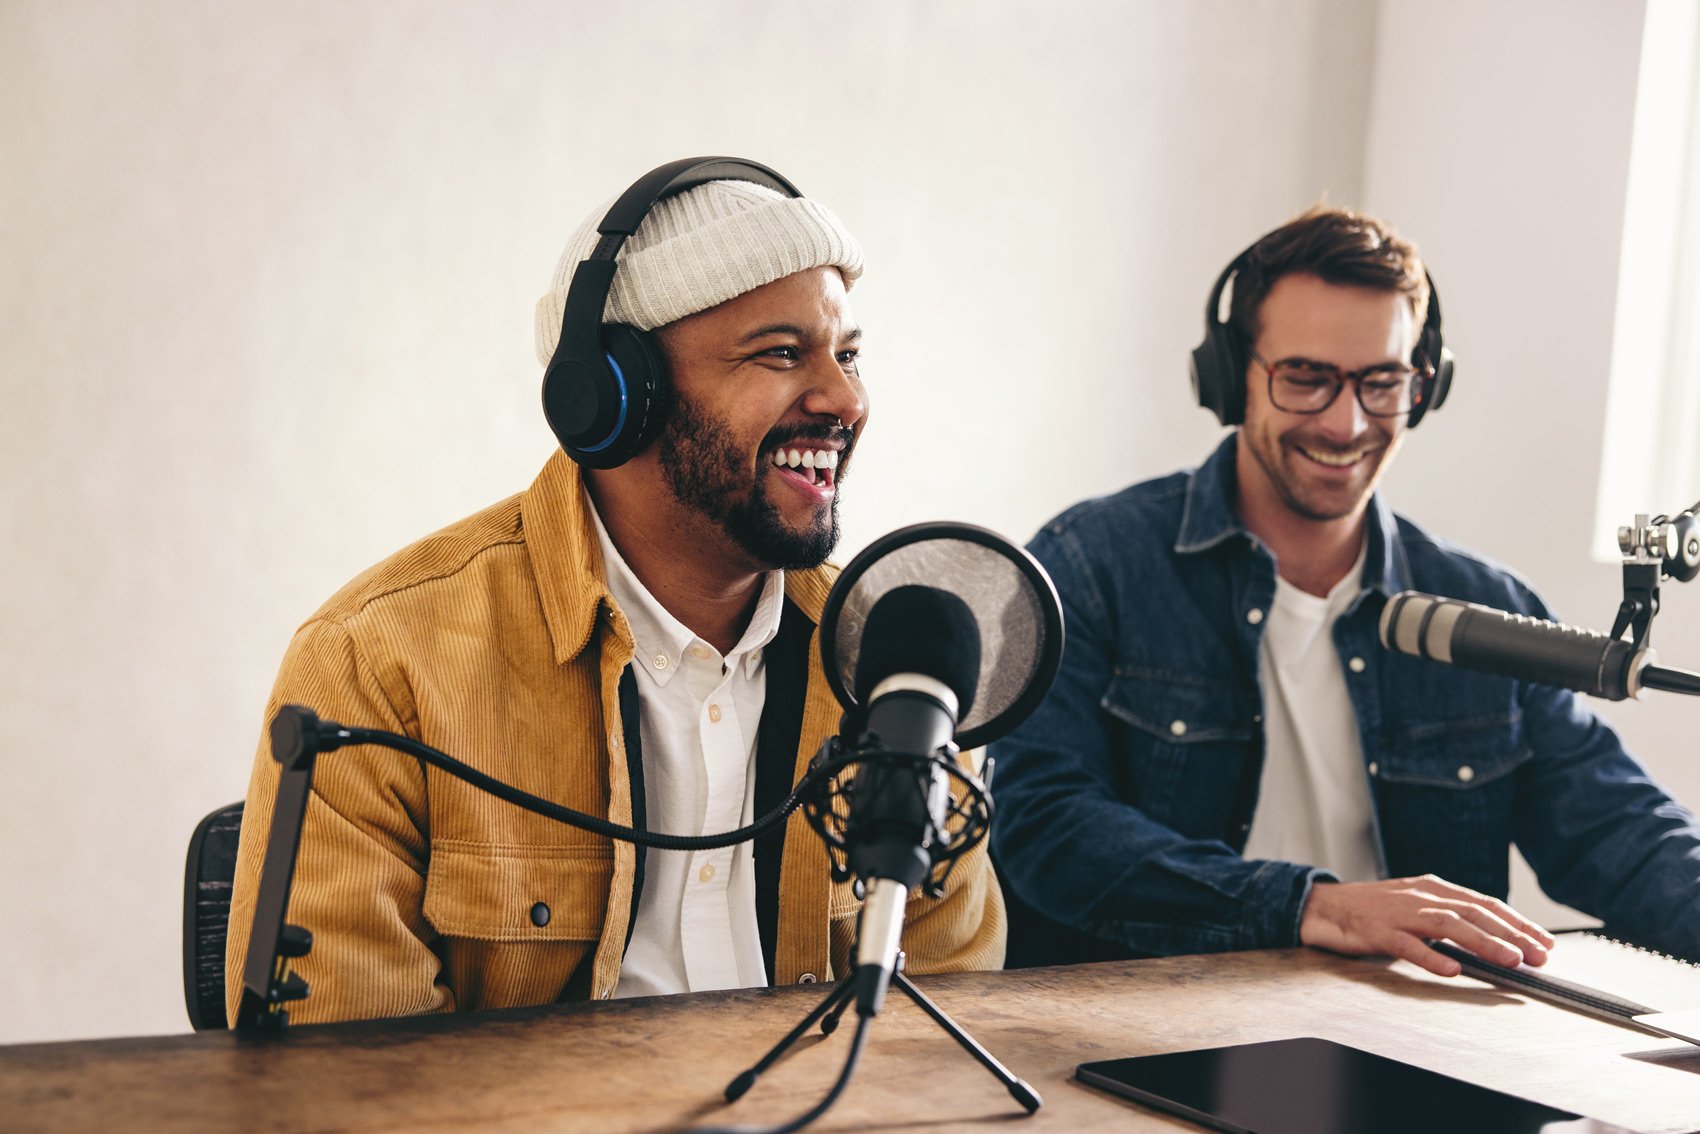 Ways Business Owners Use Podcasts to Grow - Two Men With Headphones and Microphone